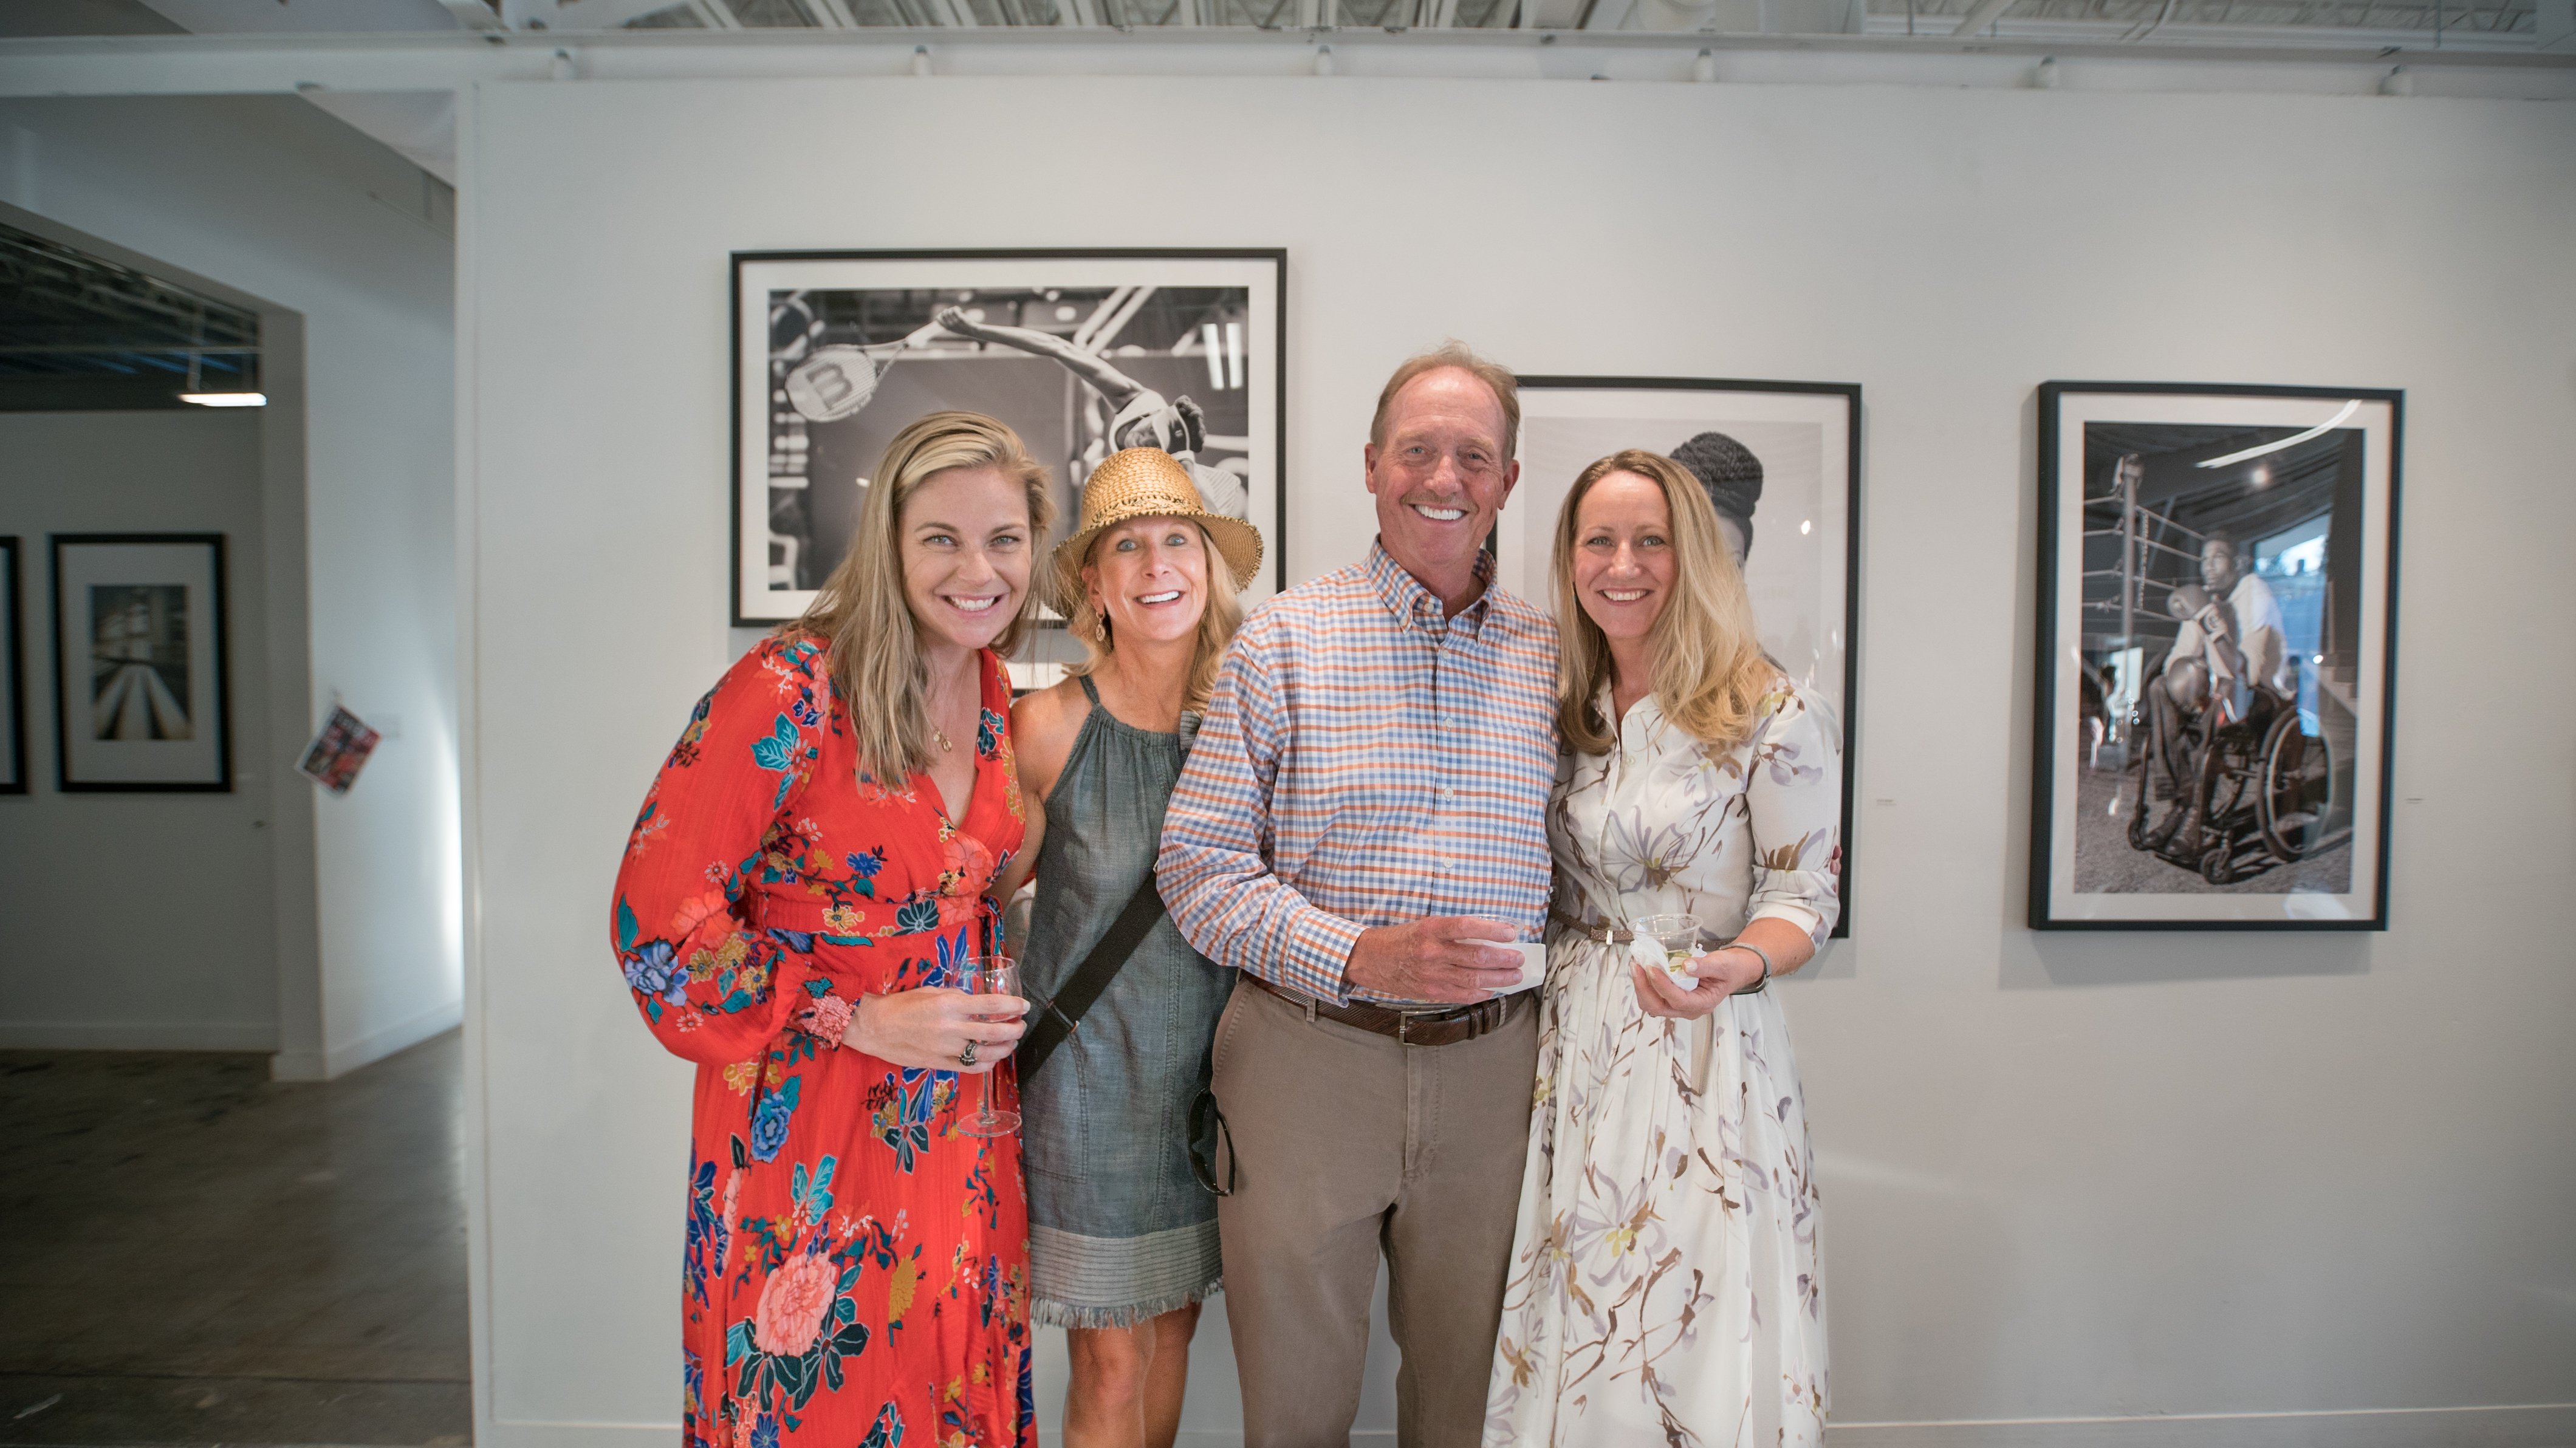 (Left to right) Alice Keeney, Kelly and David Lyle of Three Henry Wines, and Charleston editor-in-chief Darcy Shankland